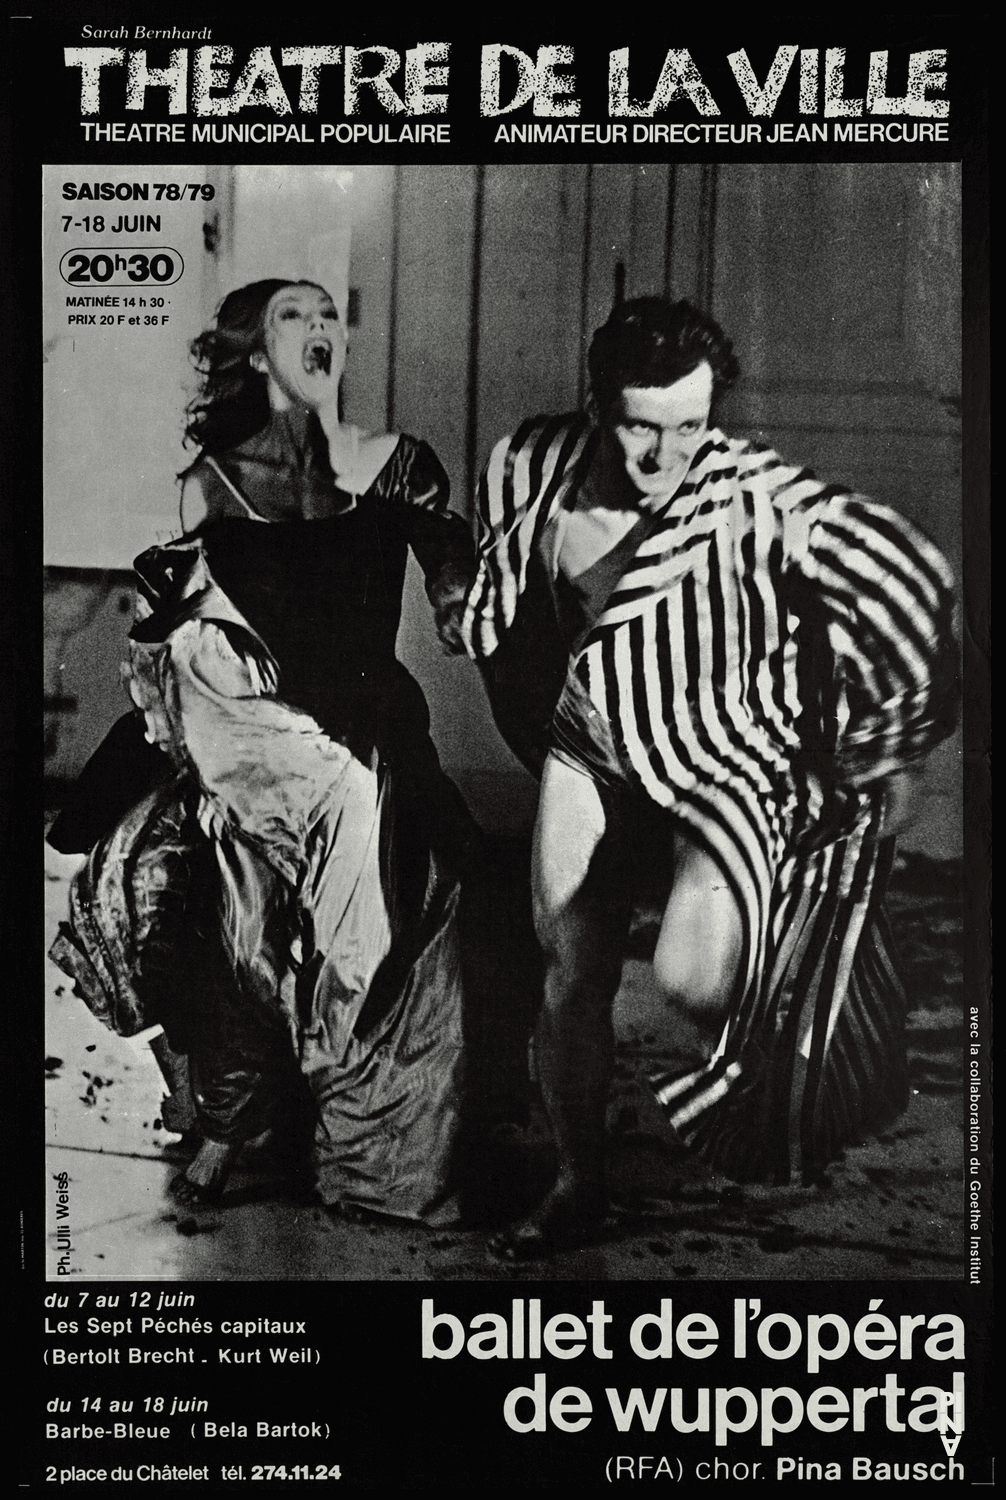 Poster for “Bluebeard. While Listening to a Tape Recording of Béla Bartók's Opera "Duke Bluebeard's Castle"” and “The Seven Deadly Sins” by Pina Bausch in Paris, 06/07/1979 – 06/18/1979